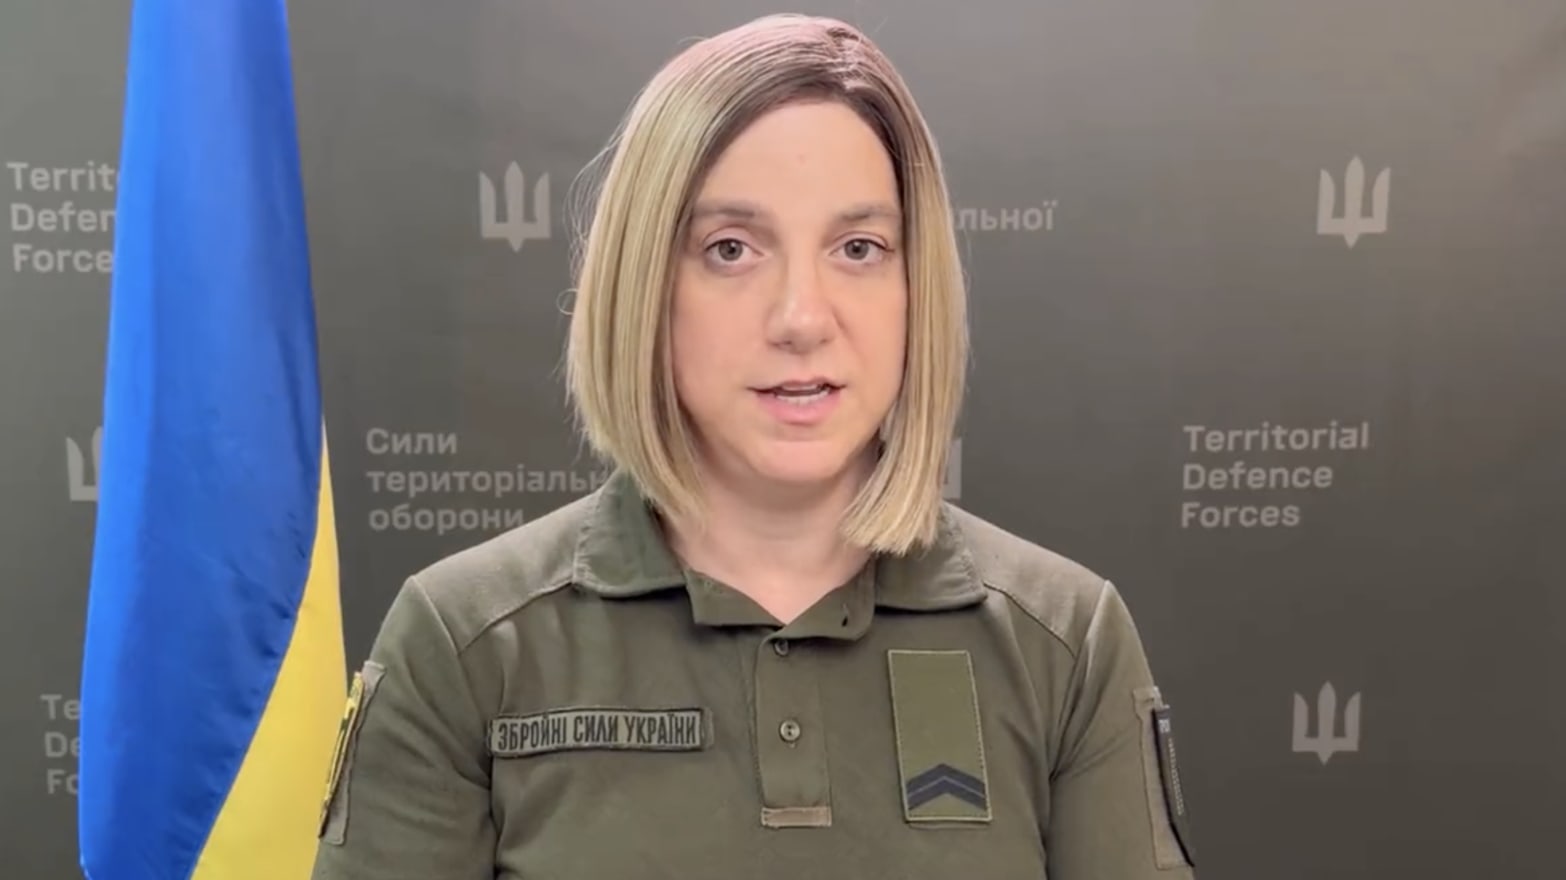 Sarah Ashton-Cirillo, a spokesperson for the Armed Forces of Ukraine, calls for a boycott of CNN after the network described foreign fighters as ‘Western mercenaries.’